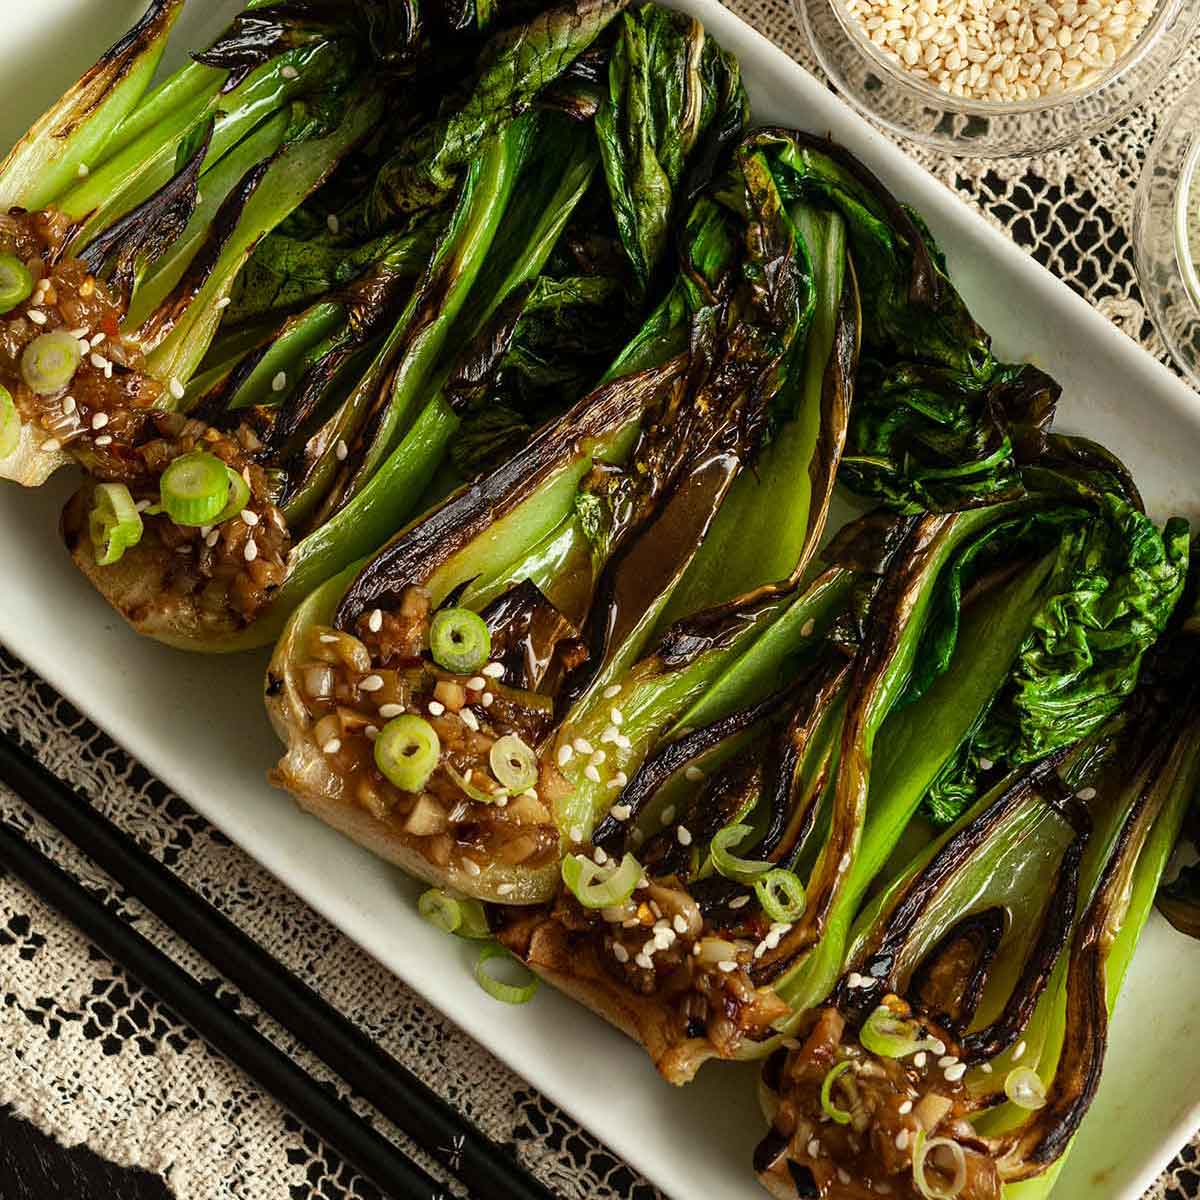 5 seared baby bok choy on a plate beside chop sticks, a bowl of sesame seeds and sauce on a lace table cloth.